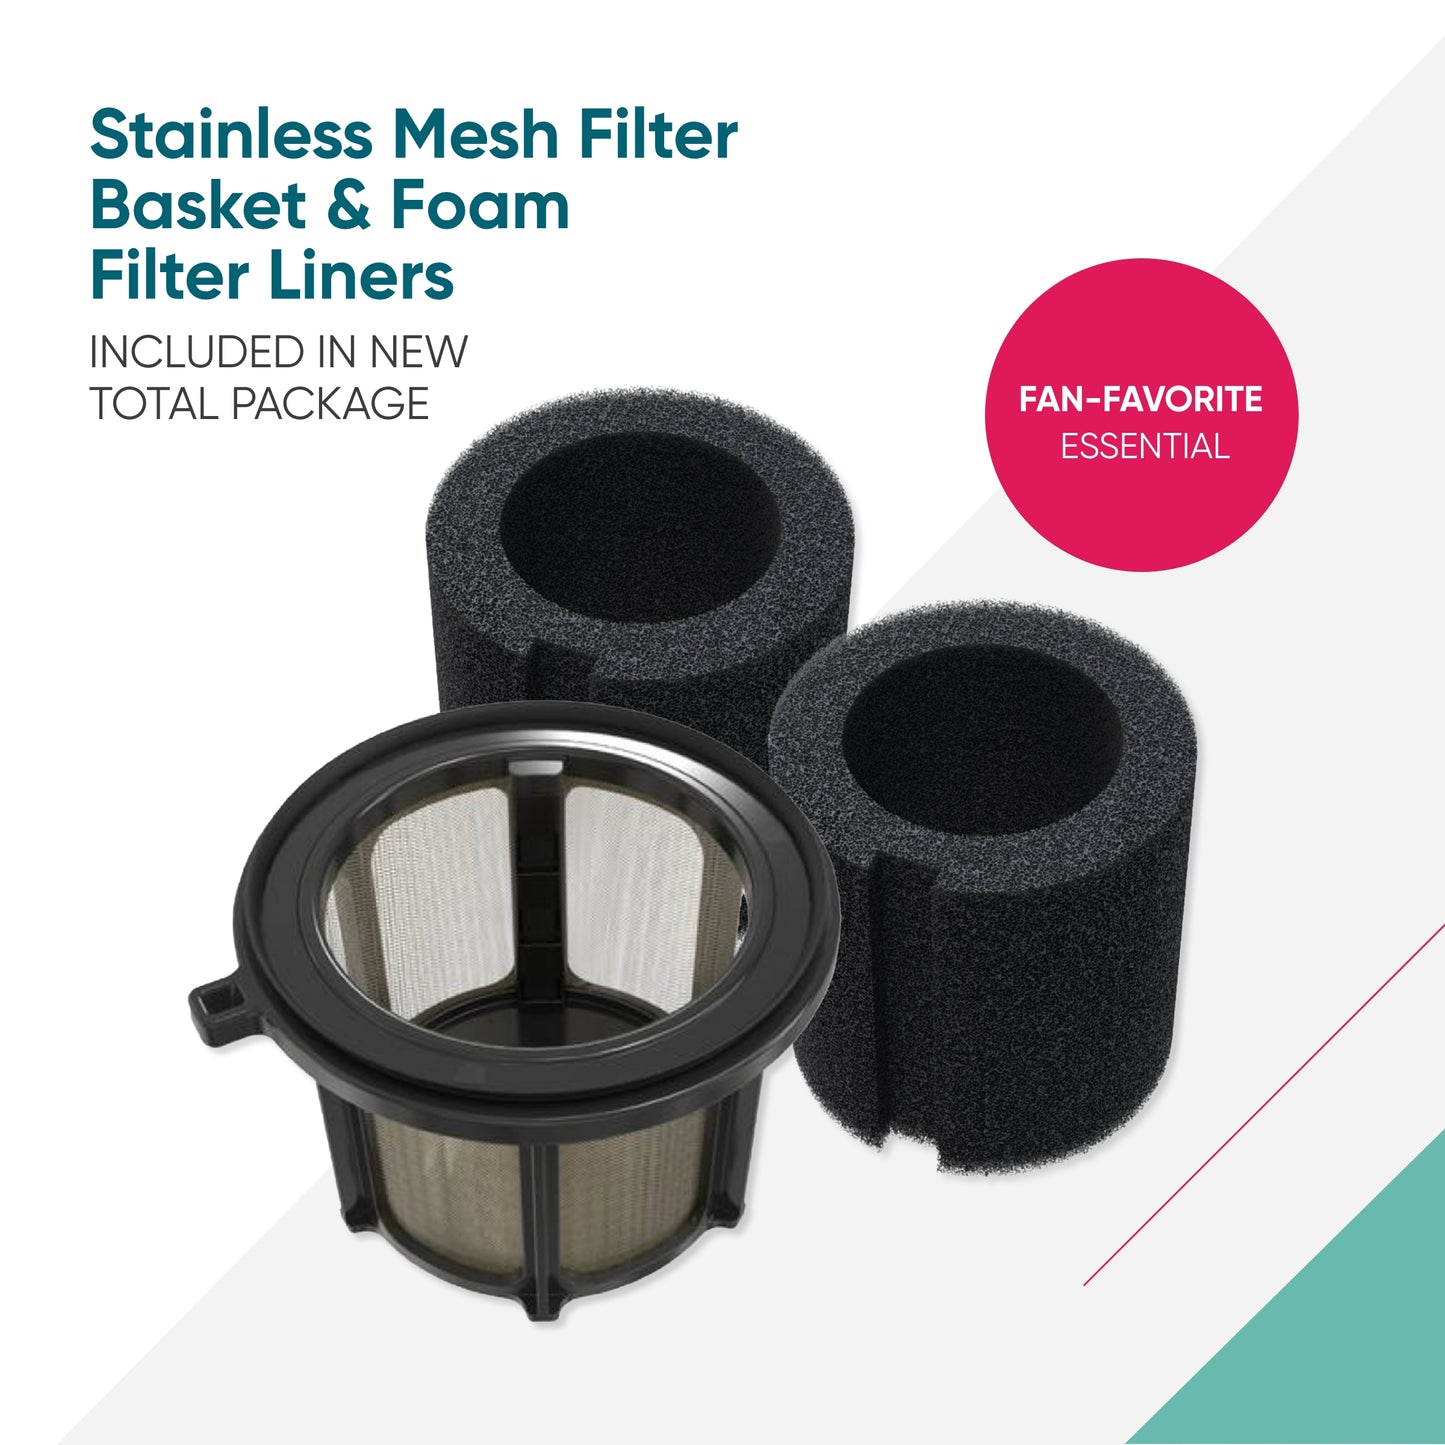 stainless mesh filter basket & foam filter liners included in new total package Fan-Favorite essential